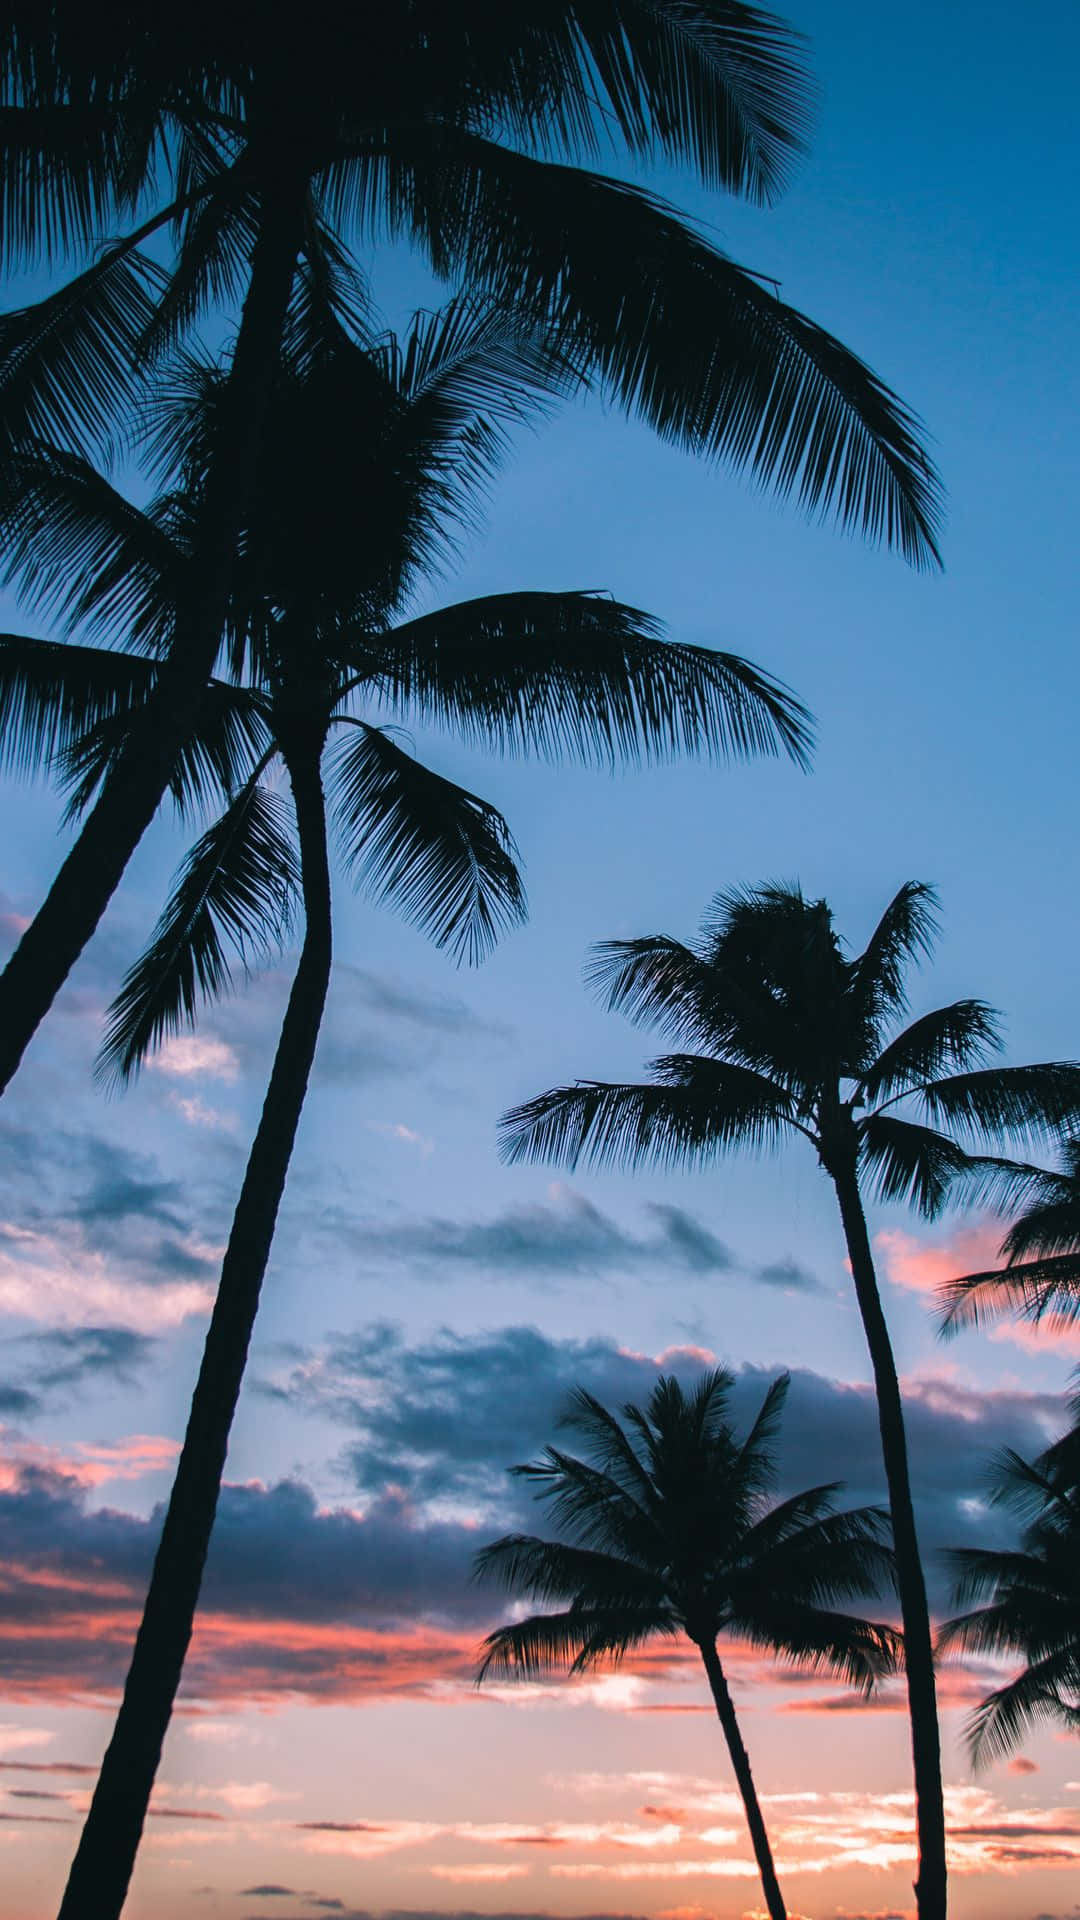 Palm Trees At Sunset Wallpaper